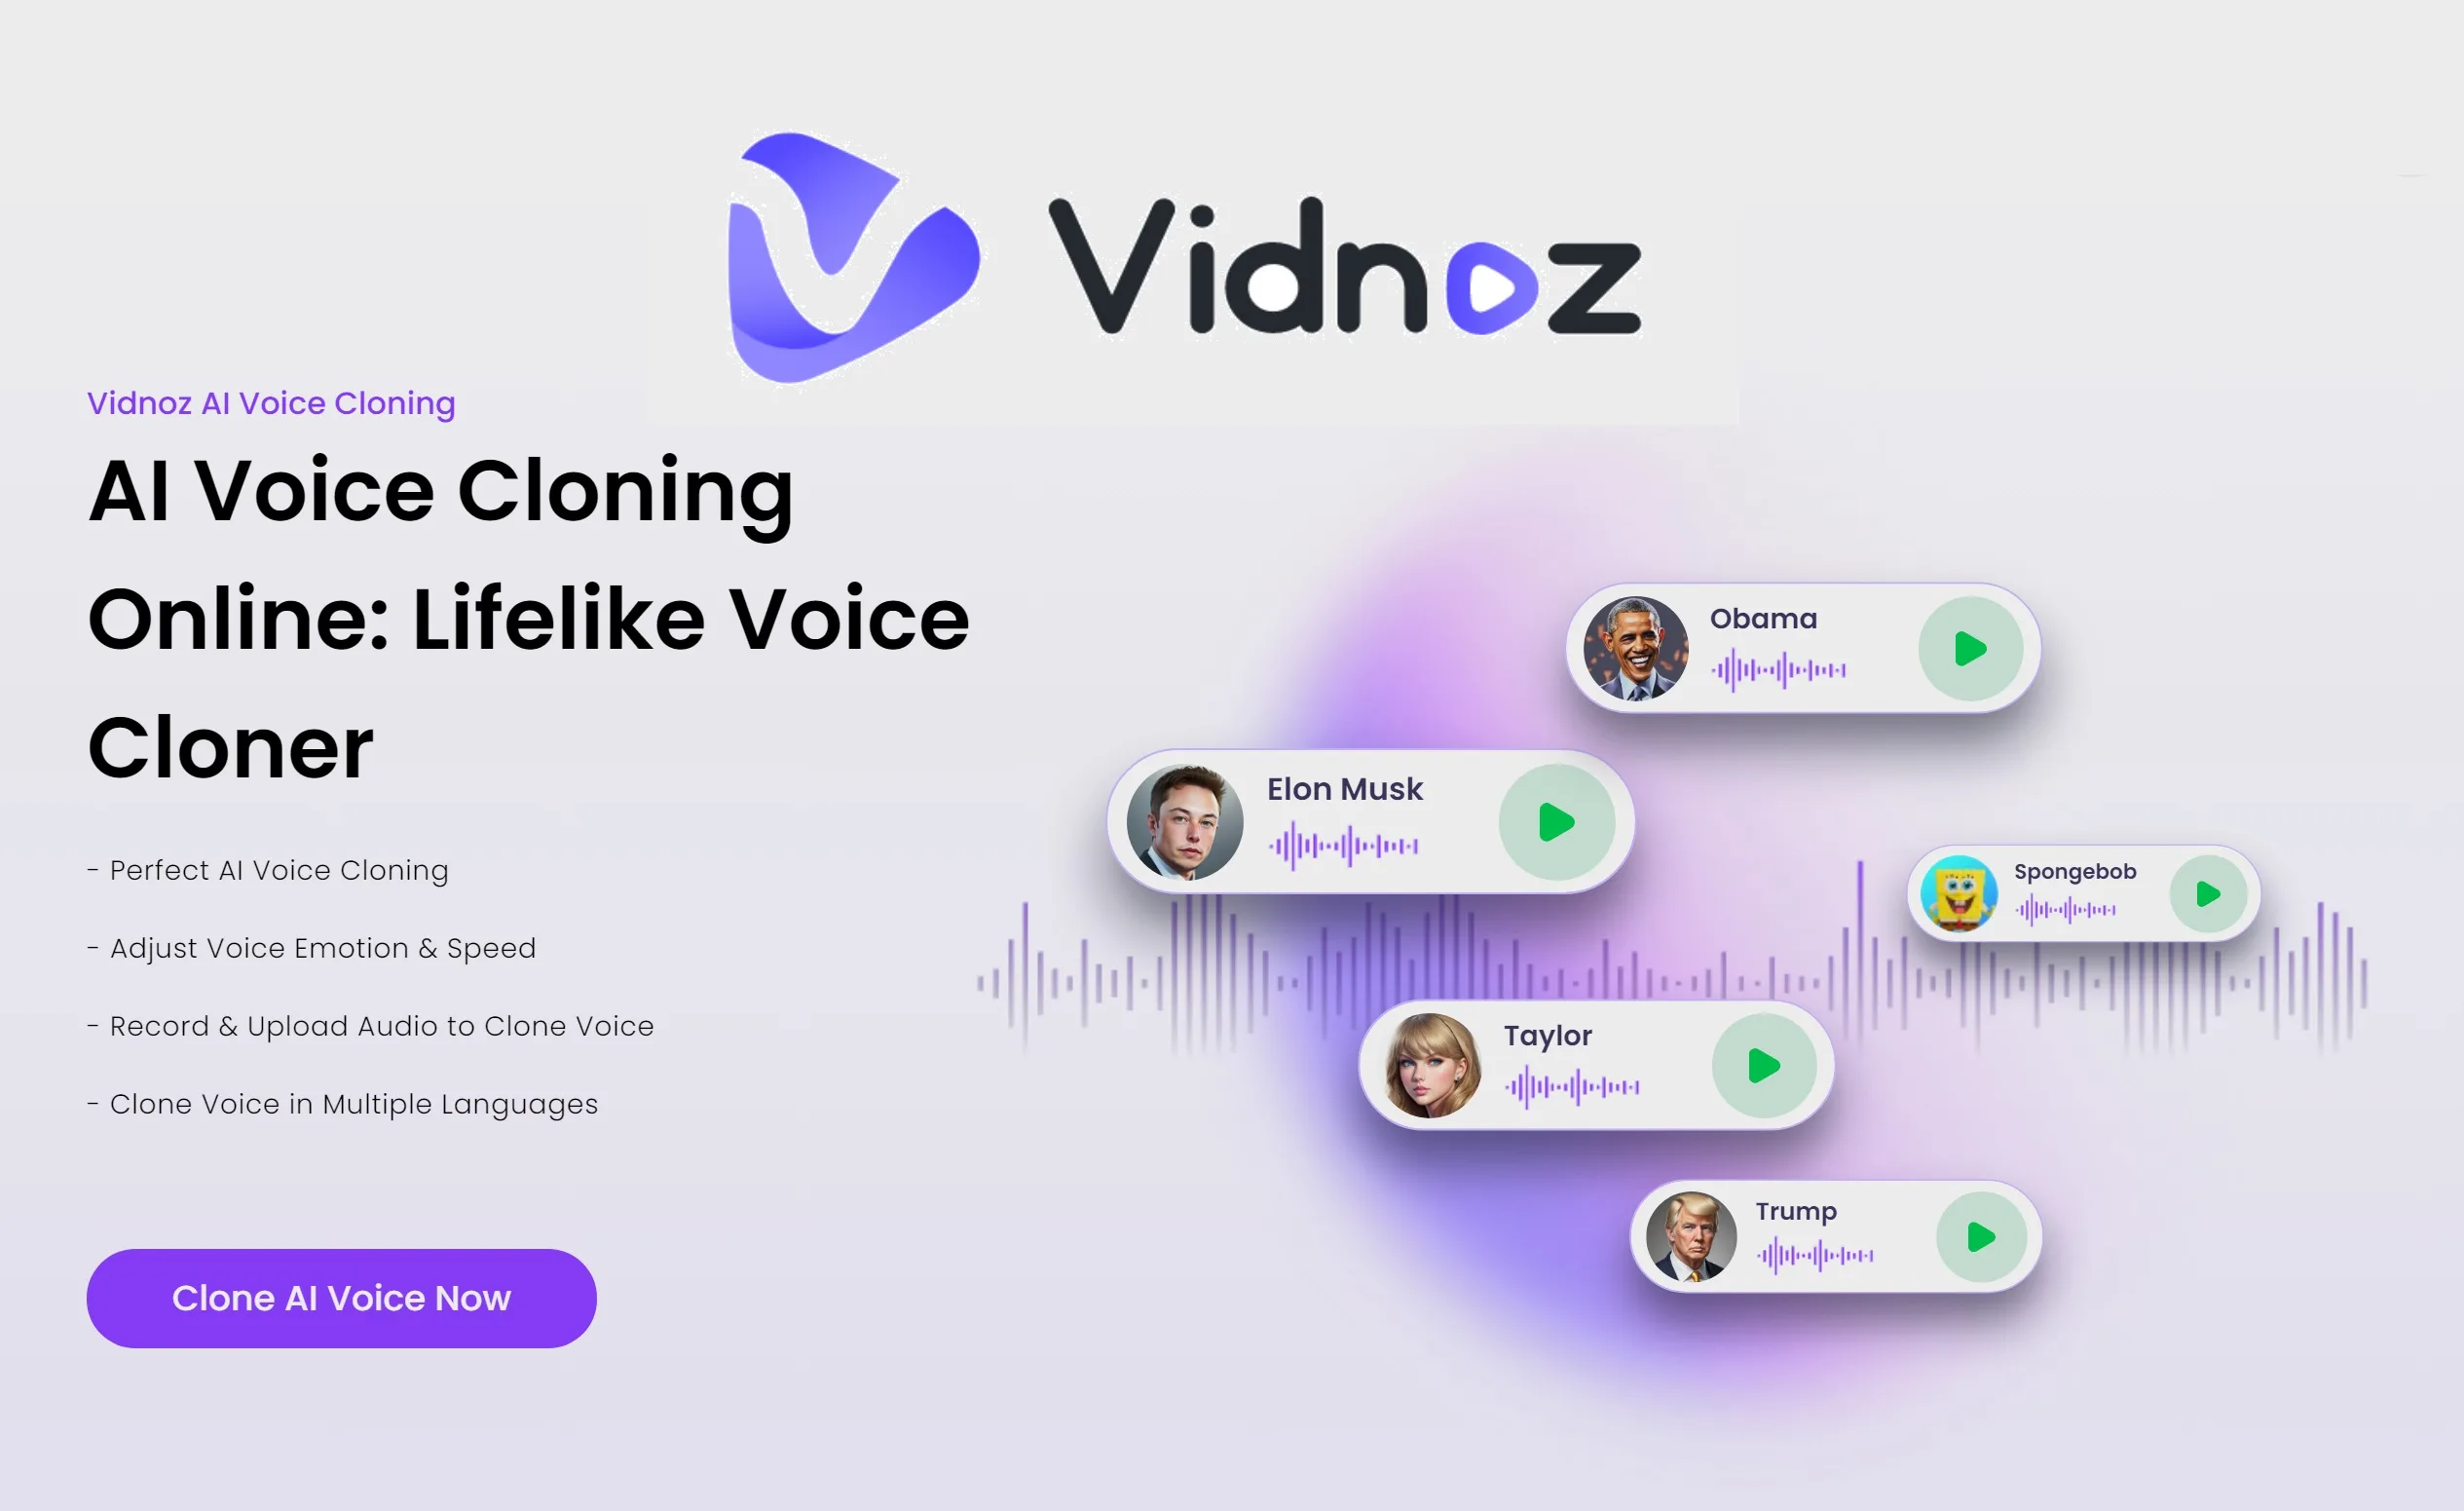 Why Should Vidnoz AI Be at the Top of Video Content?